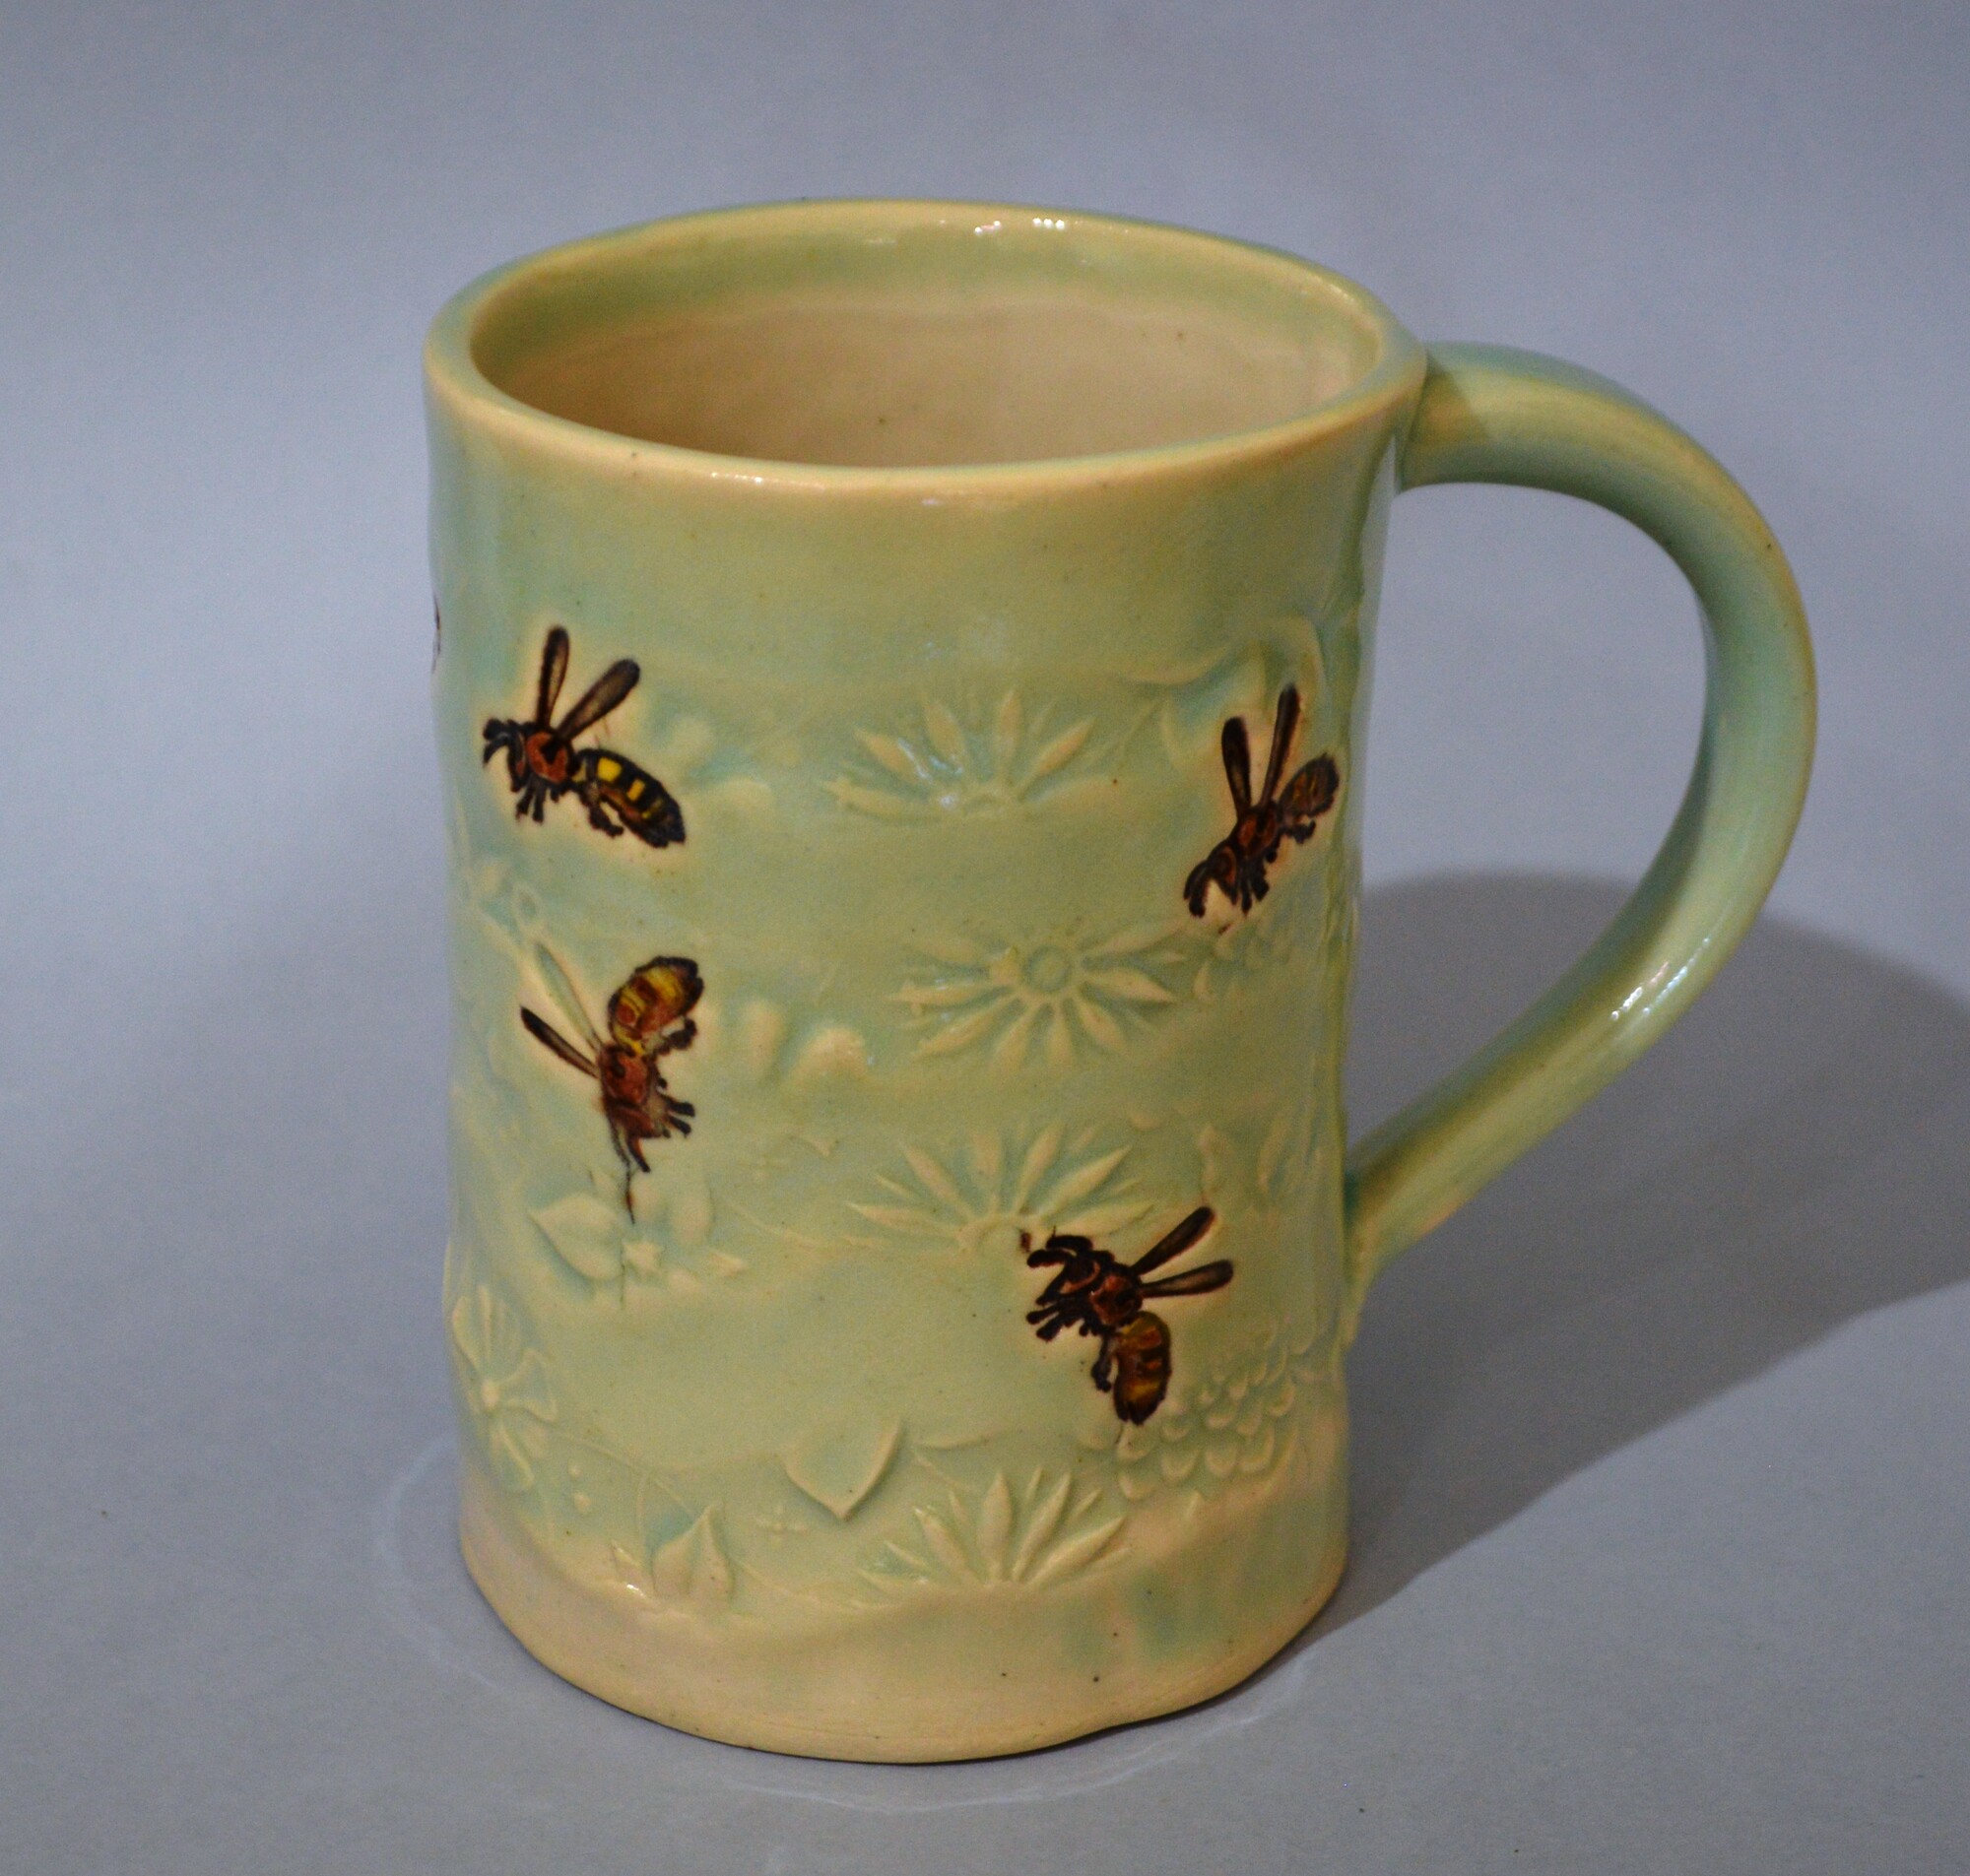 Green Bee Mug
Pam Gray
Pottery
12 oz handmade ceramic mug with light green glaze and bees motif.  Micorwave and dishwasher safe but hand washing is recommended.